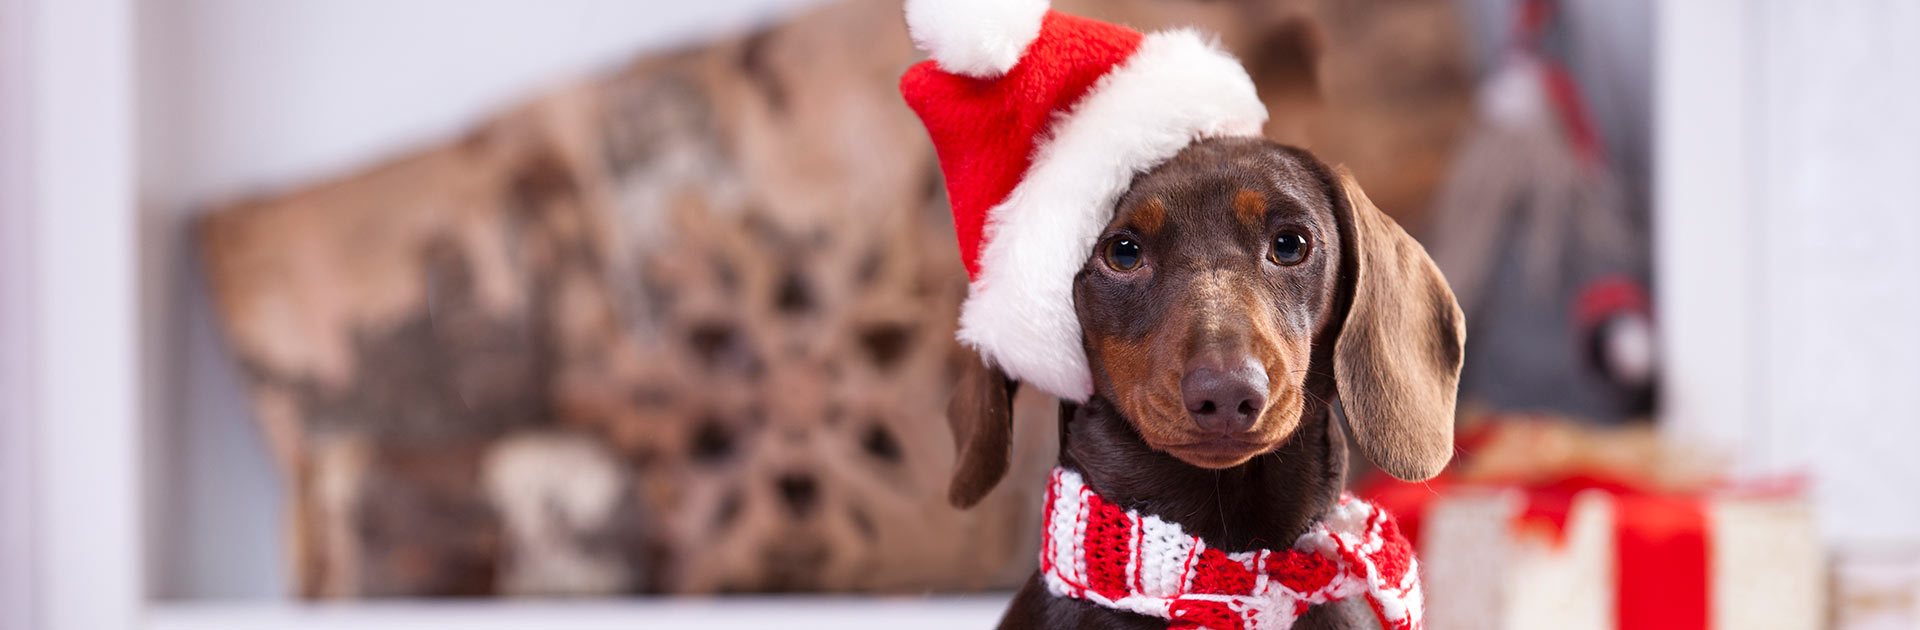 Festive sausage dog with hat and scarf